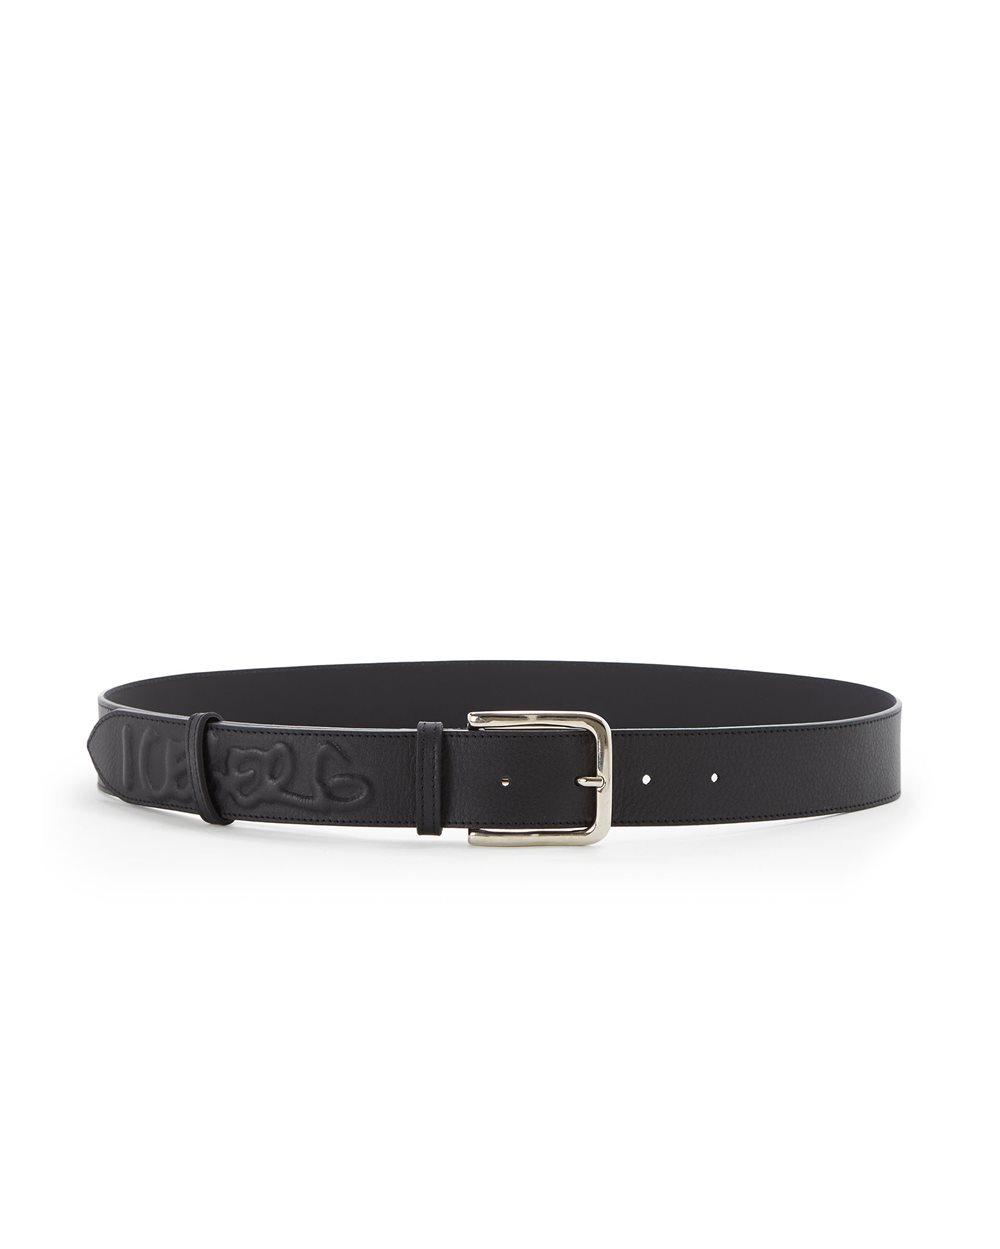 Leather belt with buckle and logo - VALENTINE'S DAY GIFTS | Iceberg - Official Website